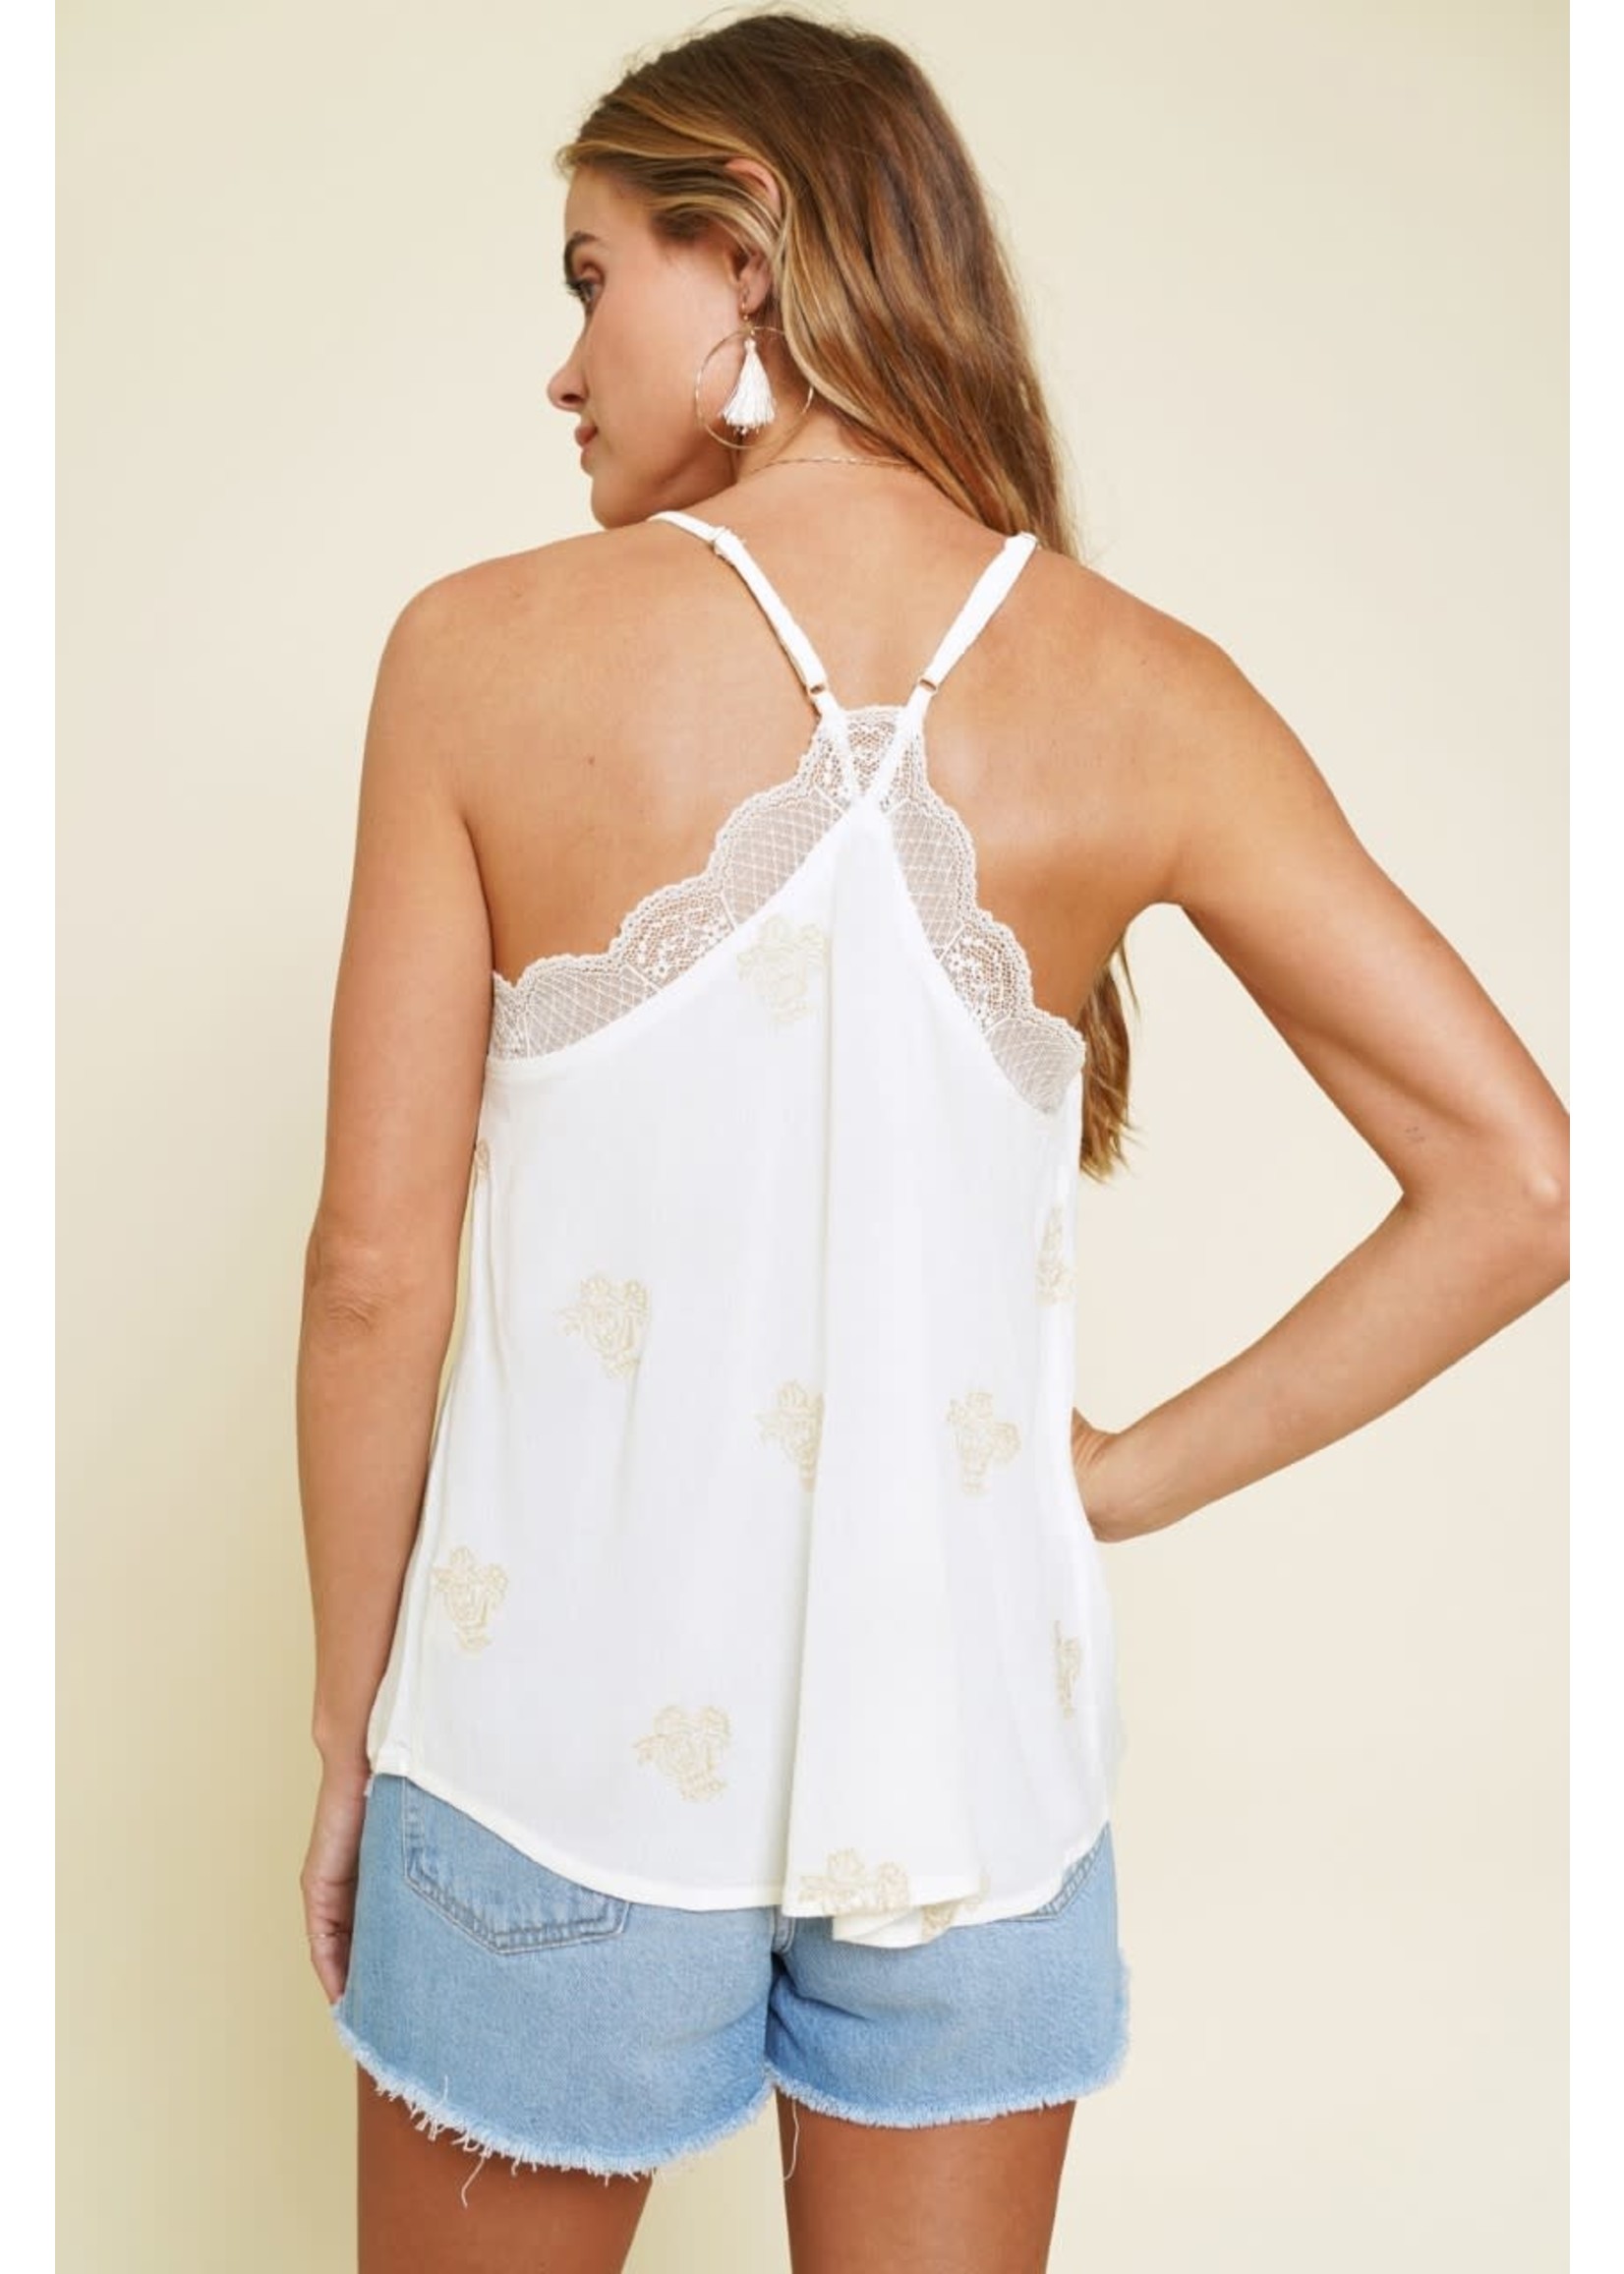 EMBROIDERED CAMI WITH TRIM LACE DETAIL